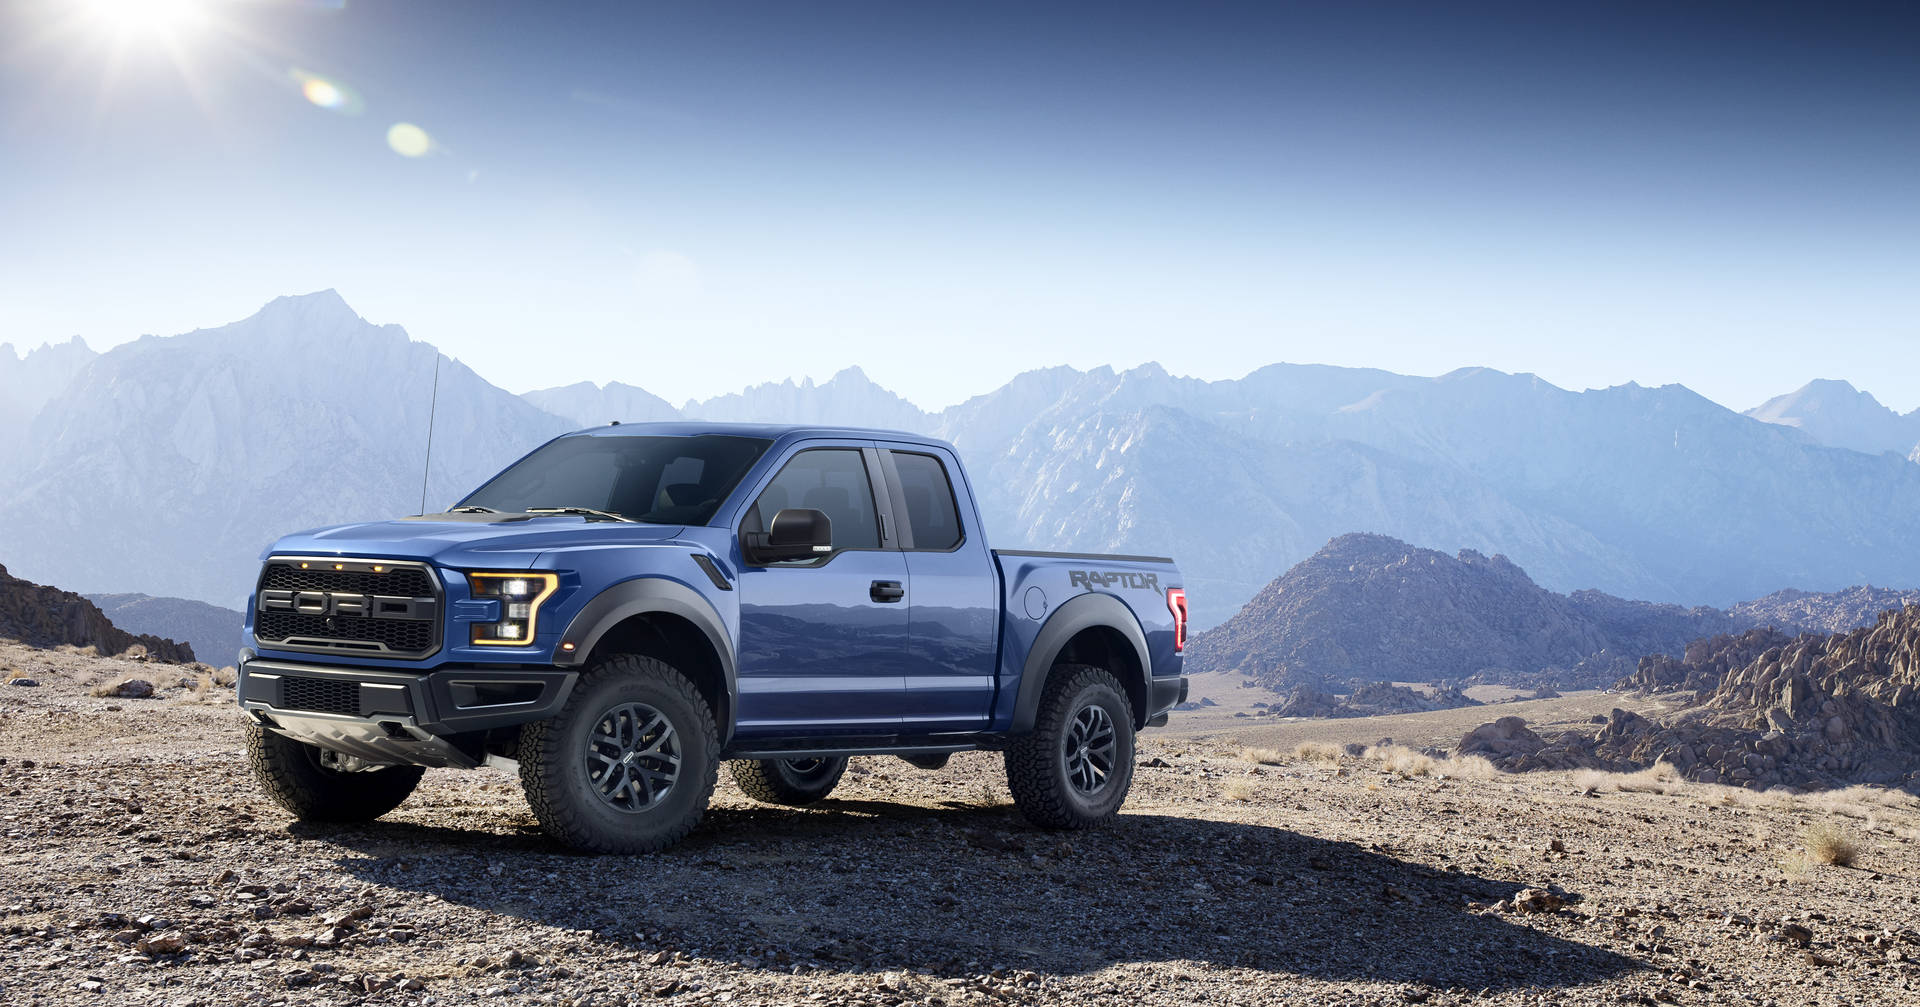 Ford Raptor With View Of Mountain